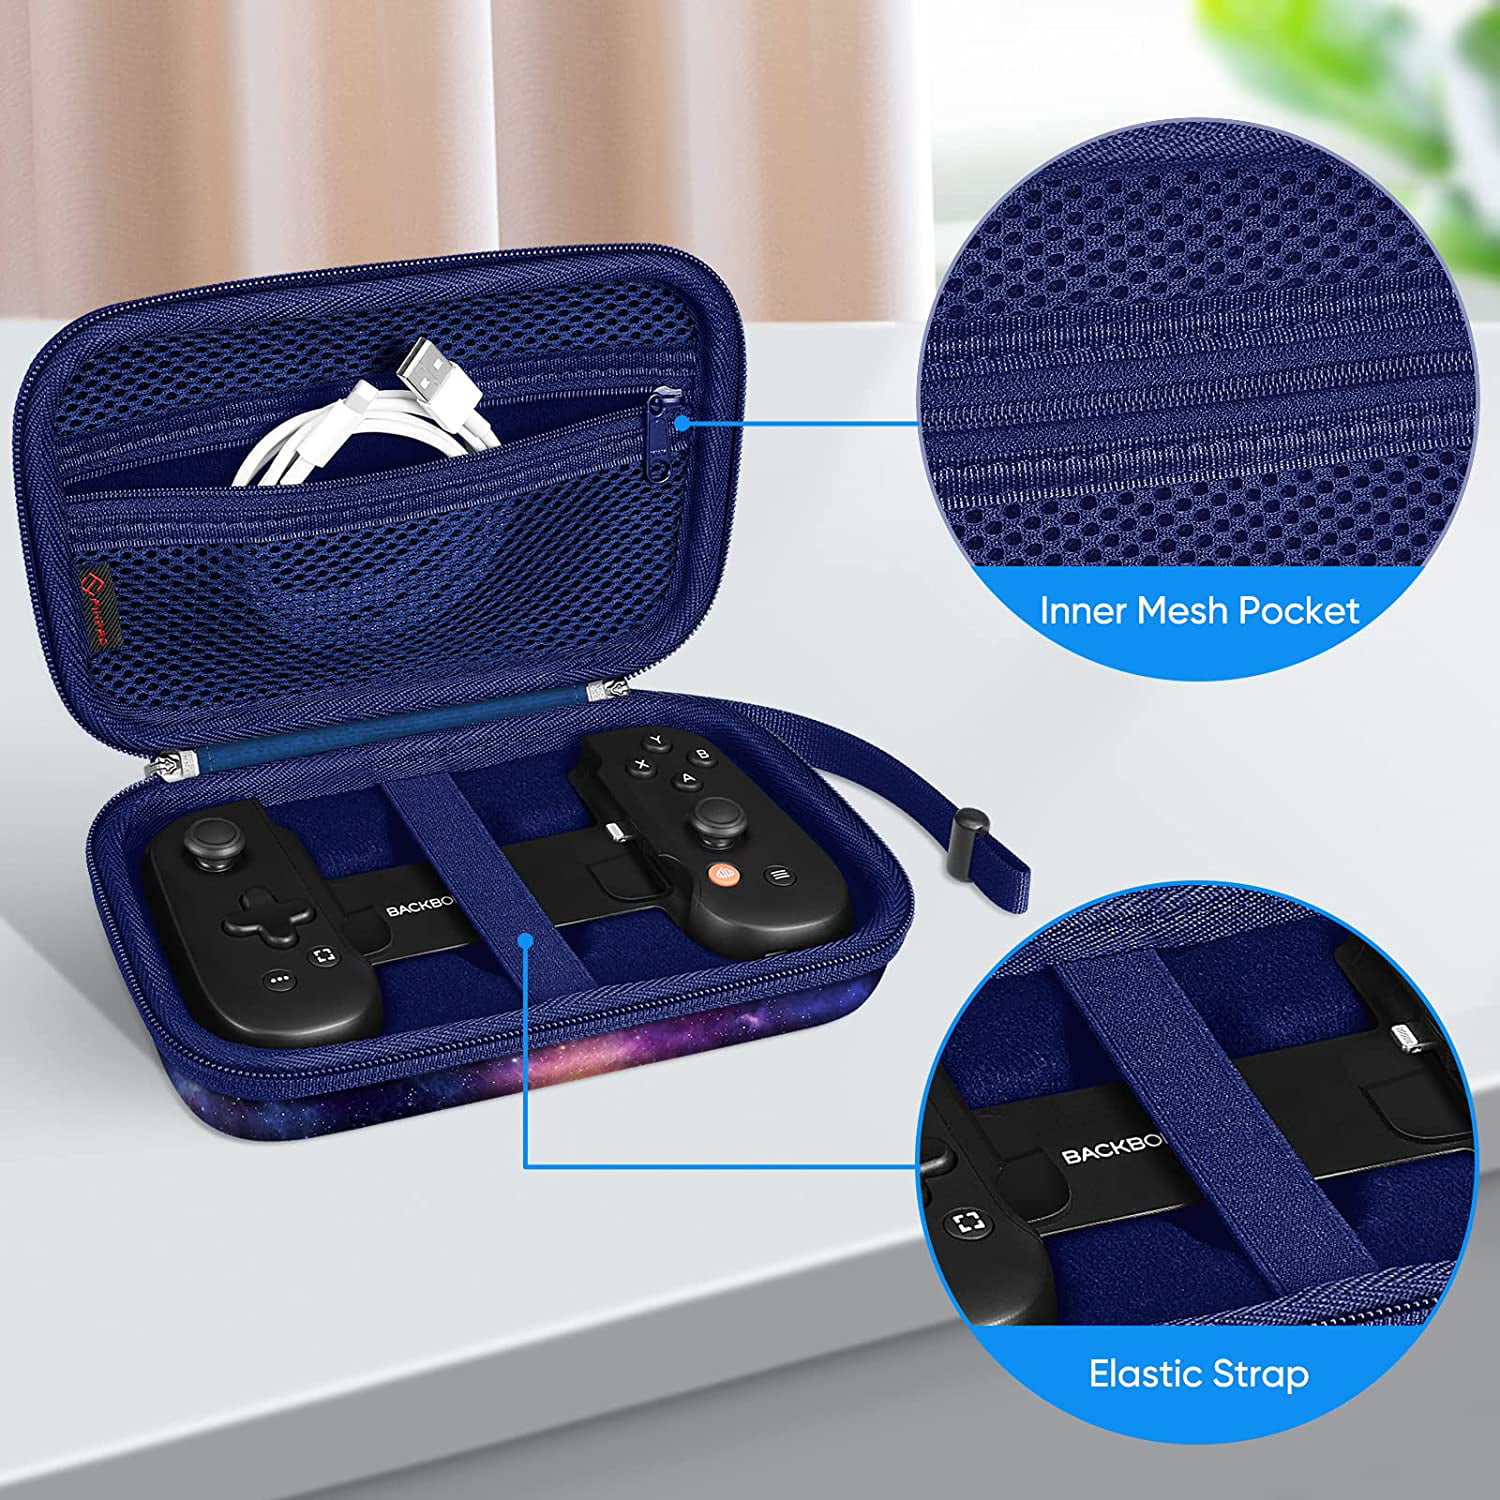 Handheld Gaming Console Portable Travel Holder Extra Mesh Pocket for Cables Power Bank Accessories Bag Only Case Compatible with Backbone One Mobile Gaming Controller 